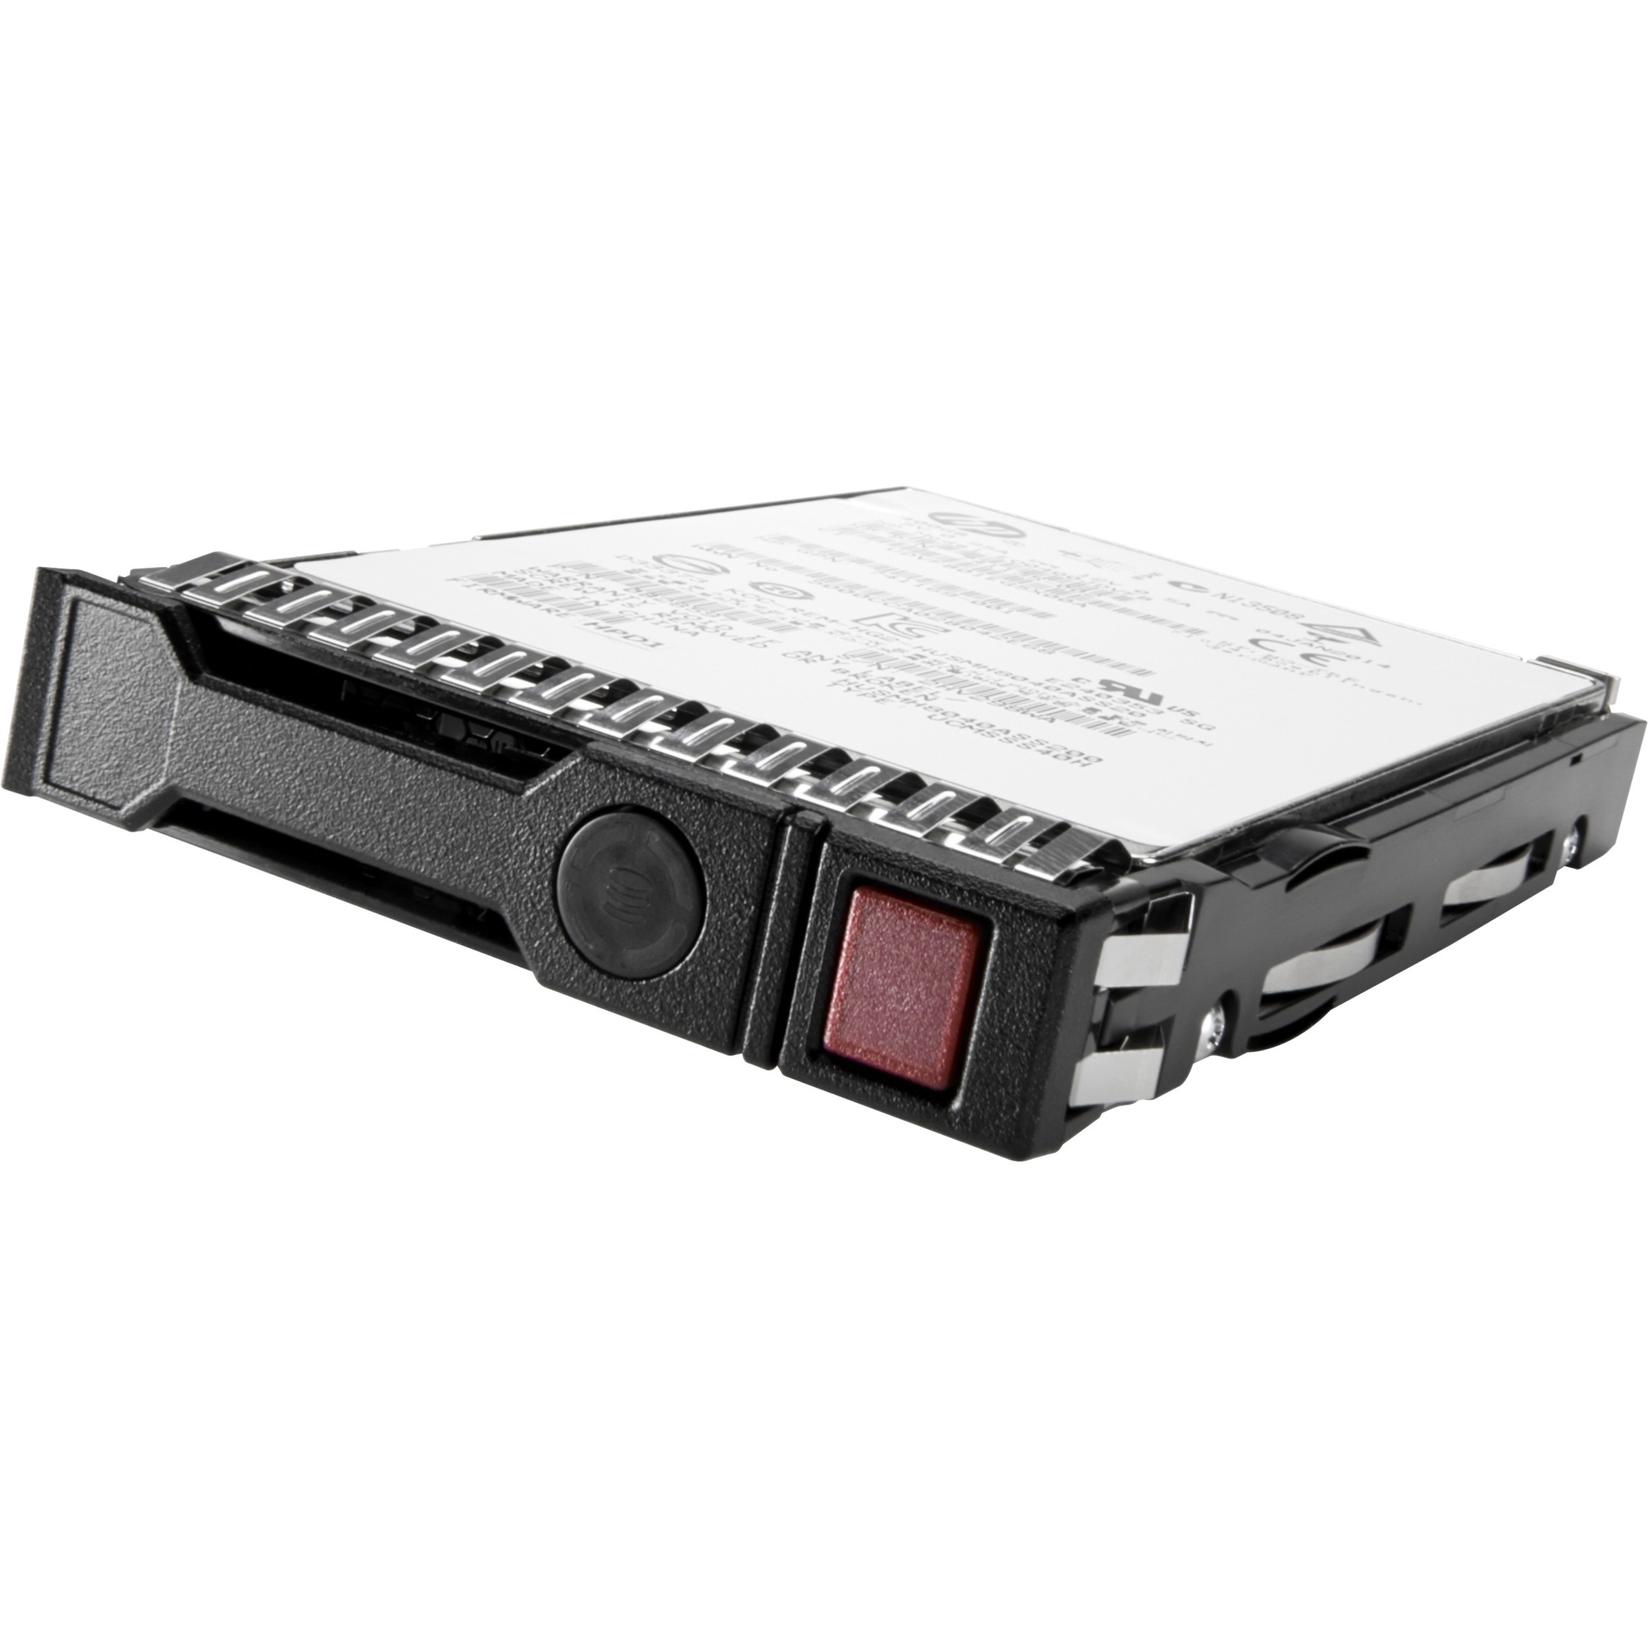 Selected image for HPE HDD 600GB/SAS/12G/10K/SFF(2.5in)/3Y Hard Drive